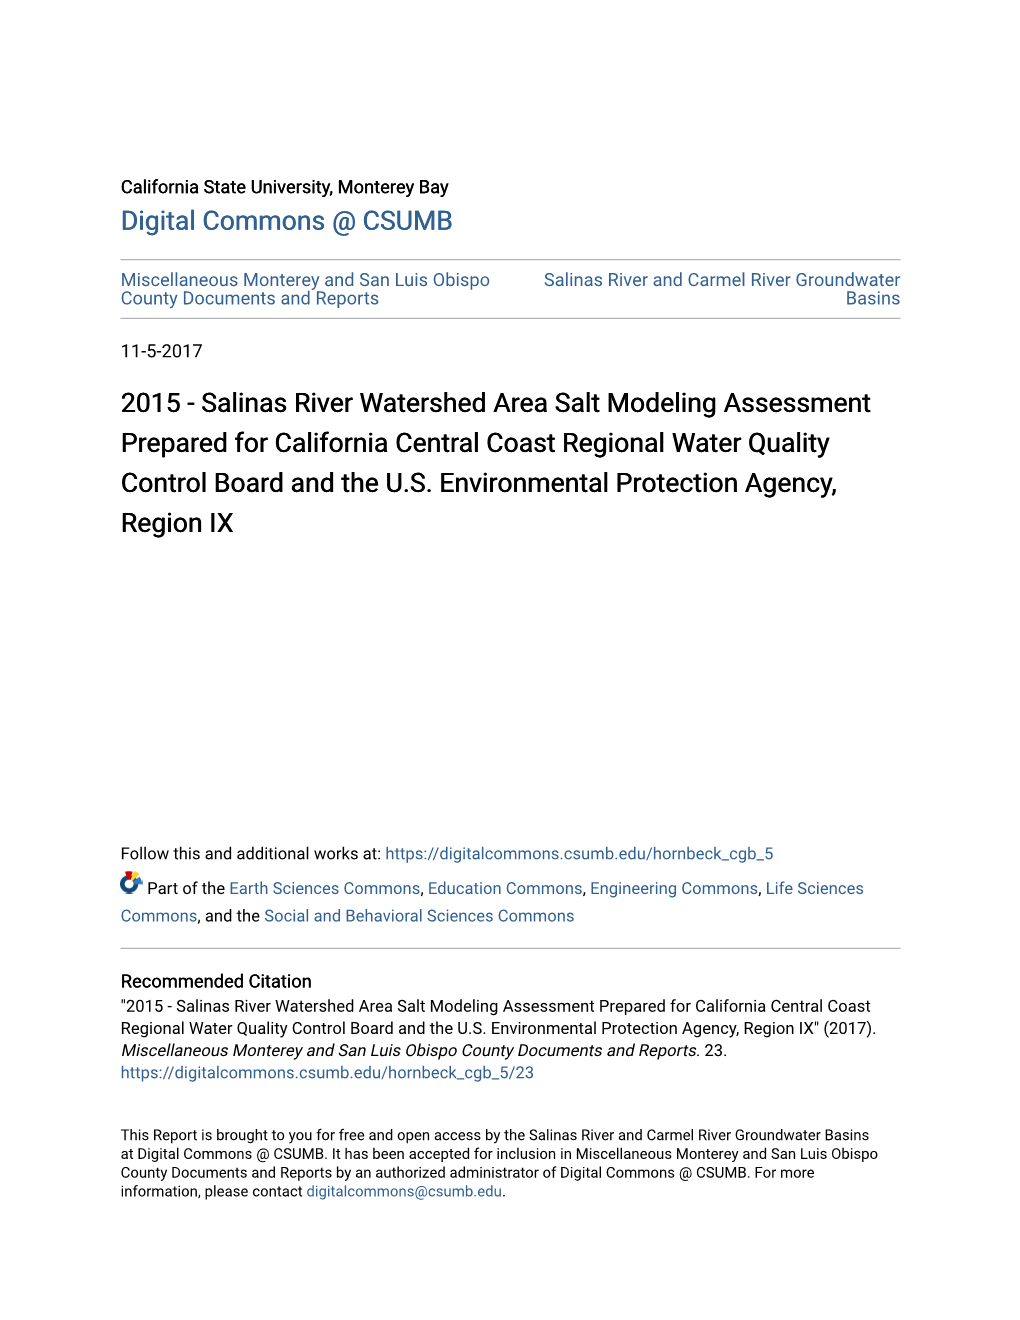 Salinas River Watershed Area Salt Modeling Assessment Prepared for California Central Coast Regional Water Quality Control Board and the U.S